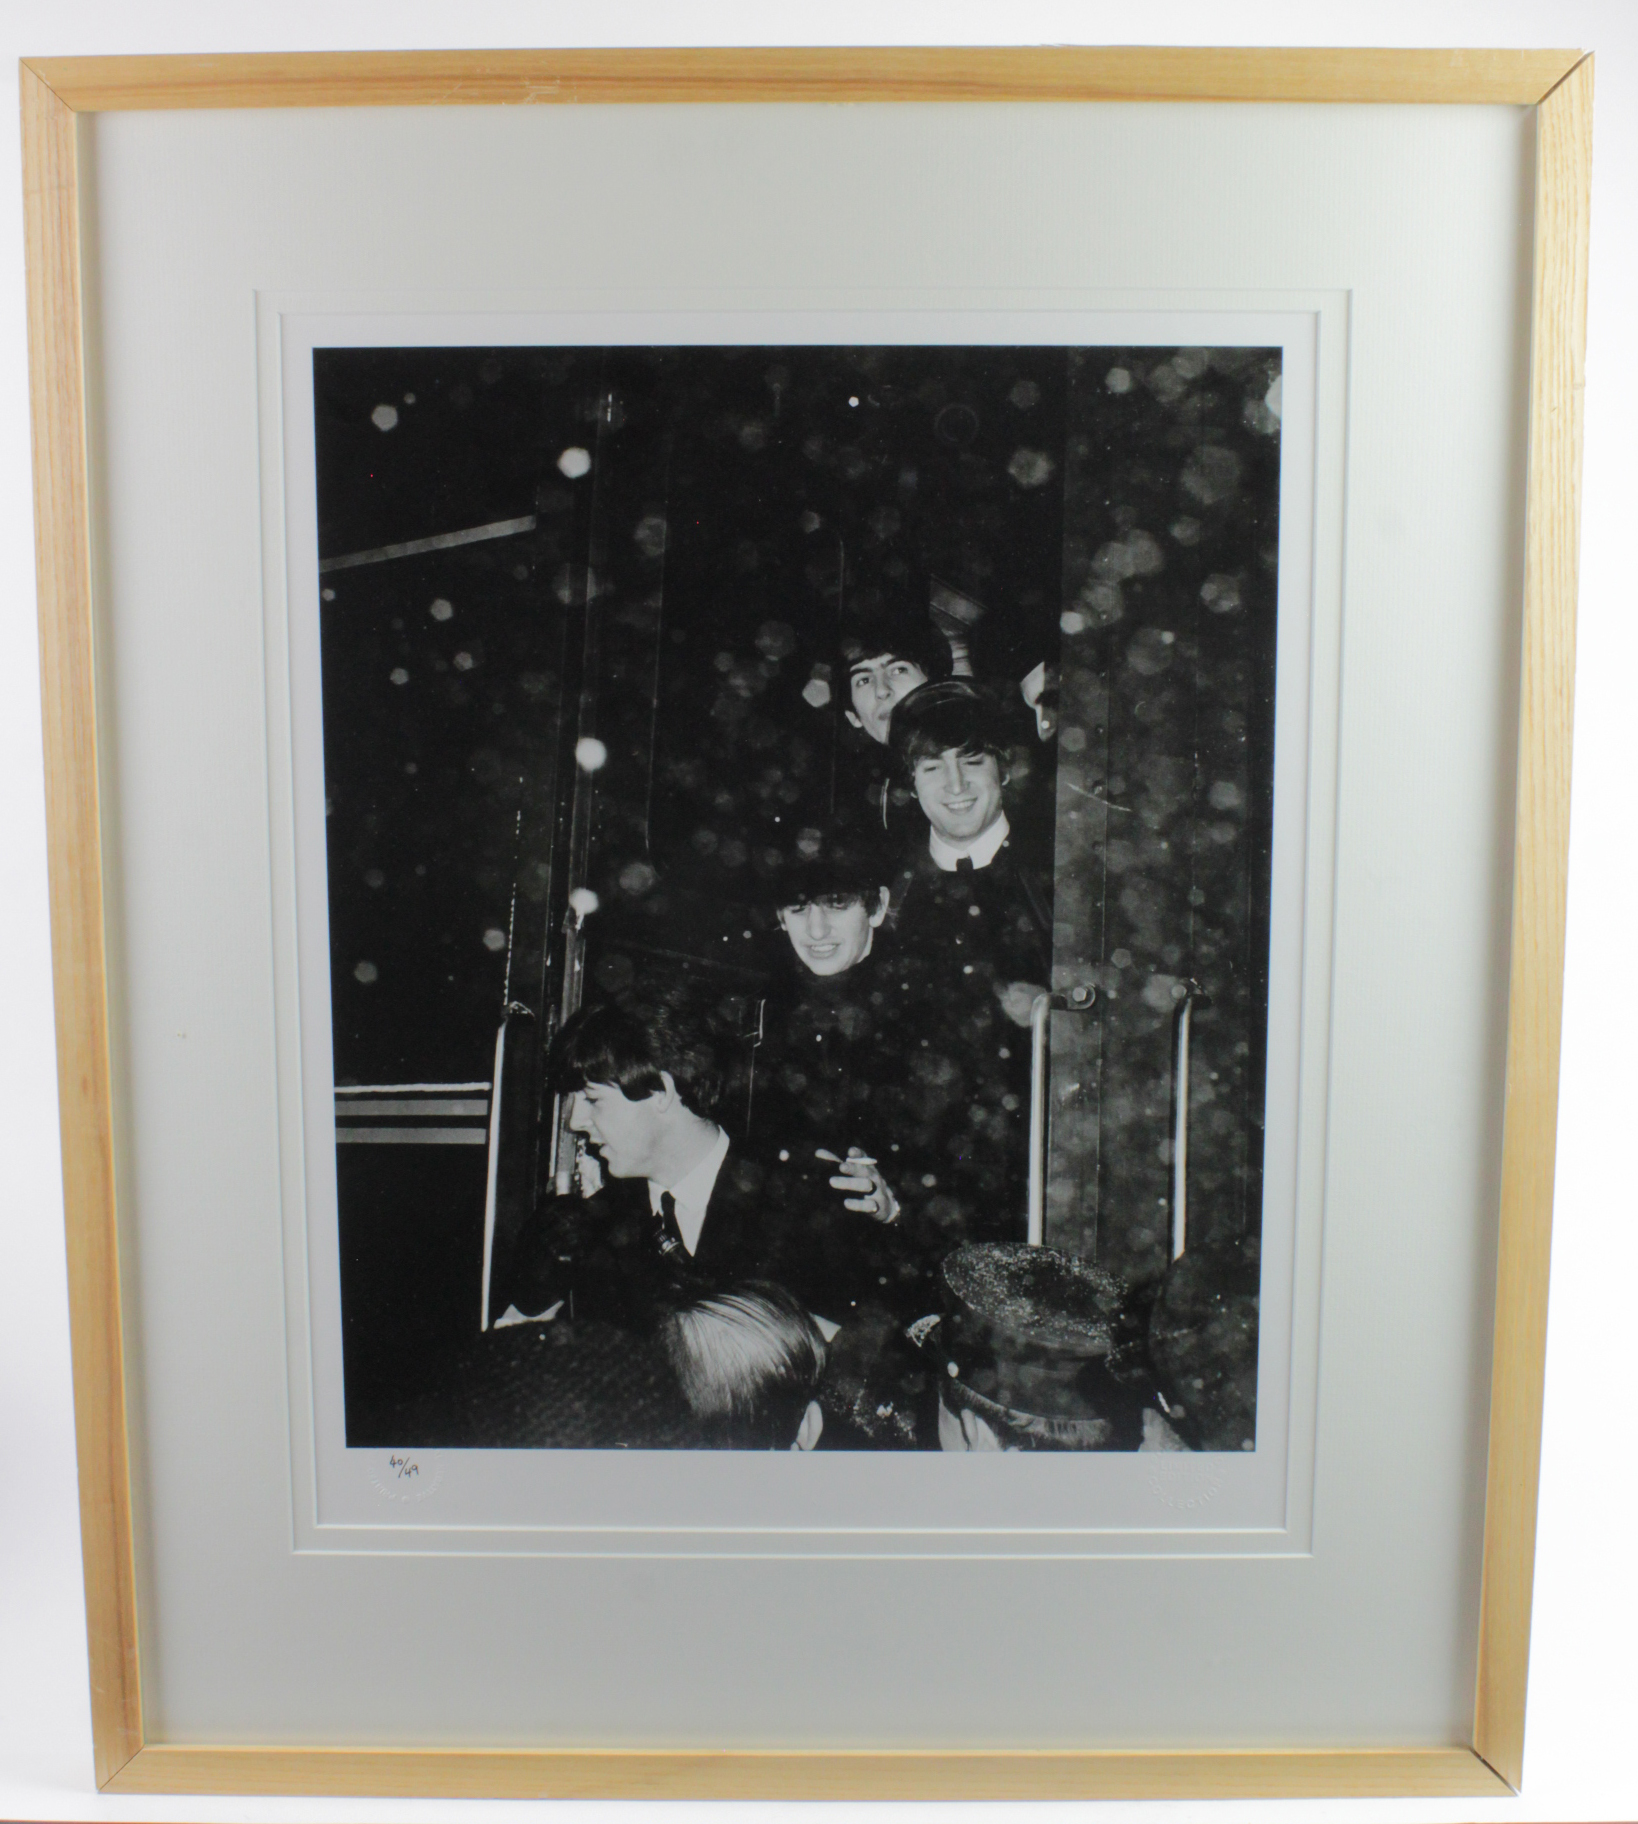 The Beatles, a 16 x 20" photograph of the them getting off a train, in the 1960’s, taken from the